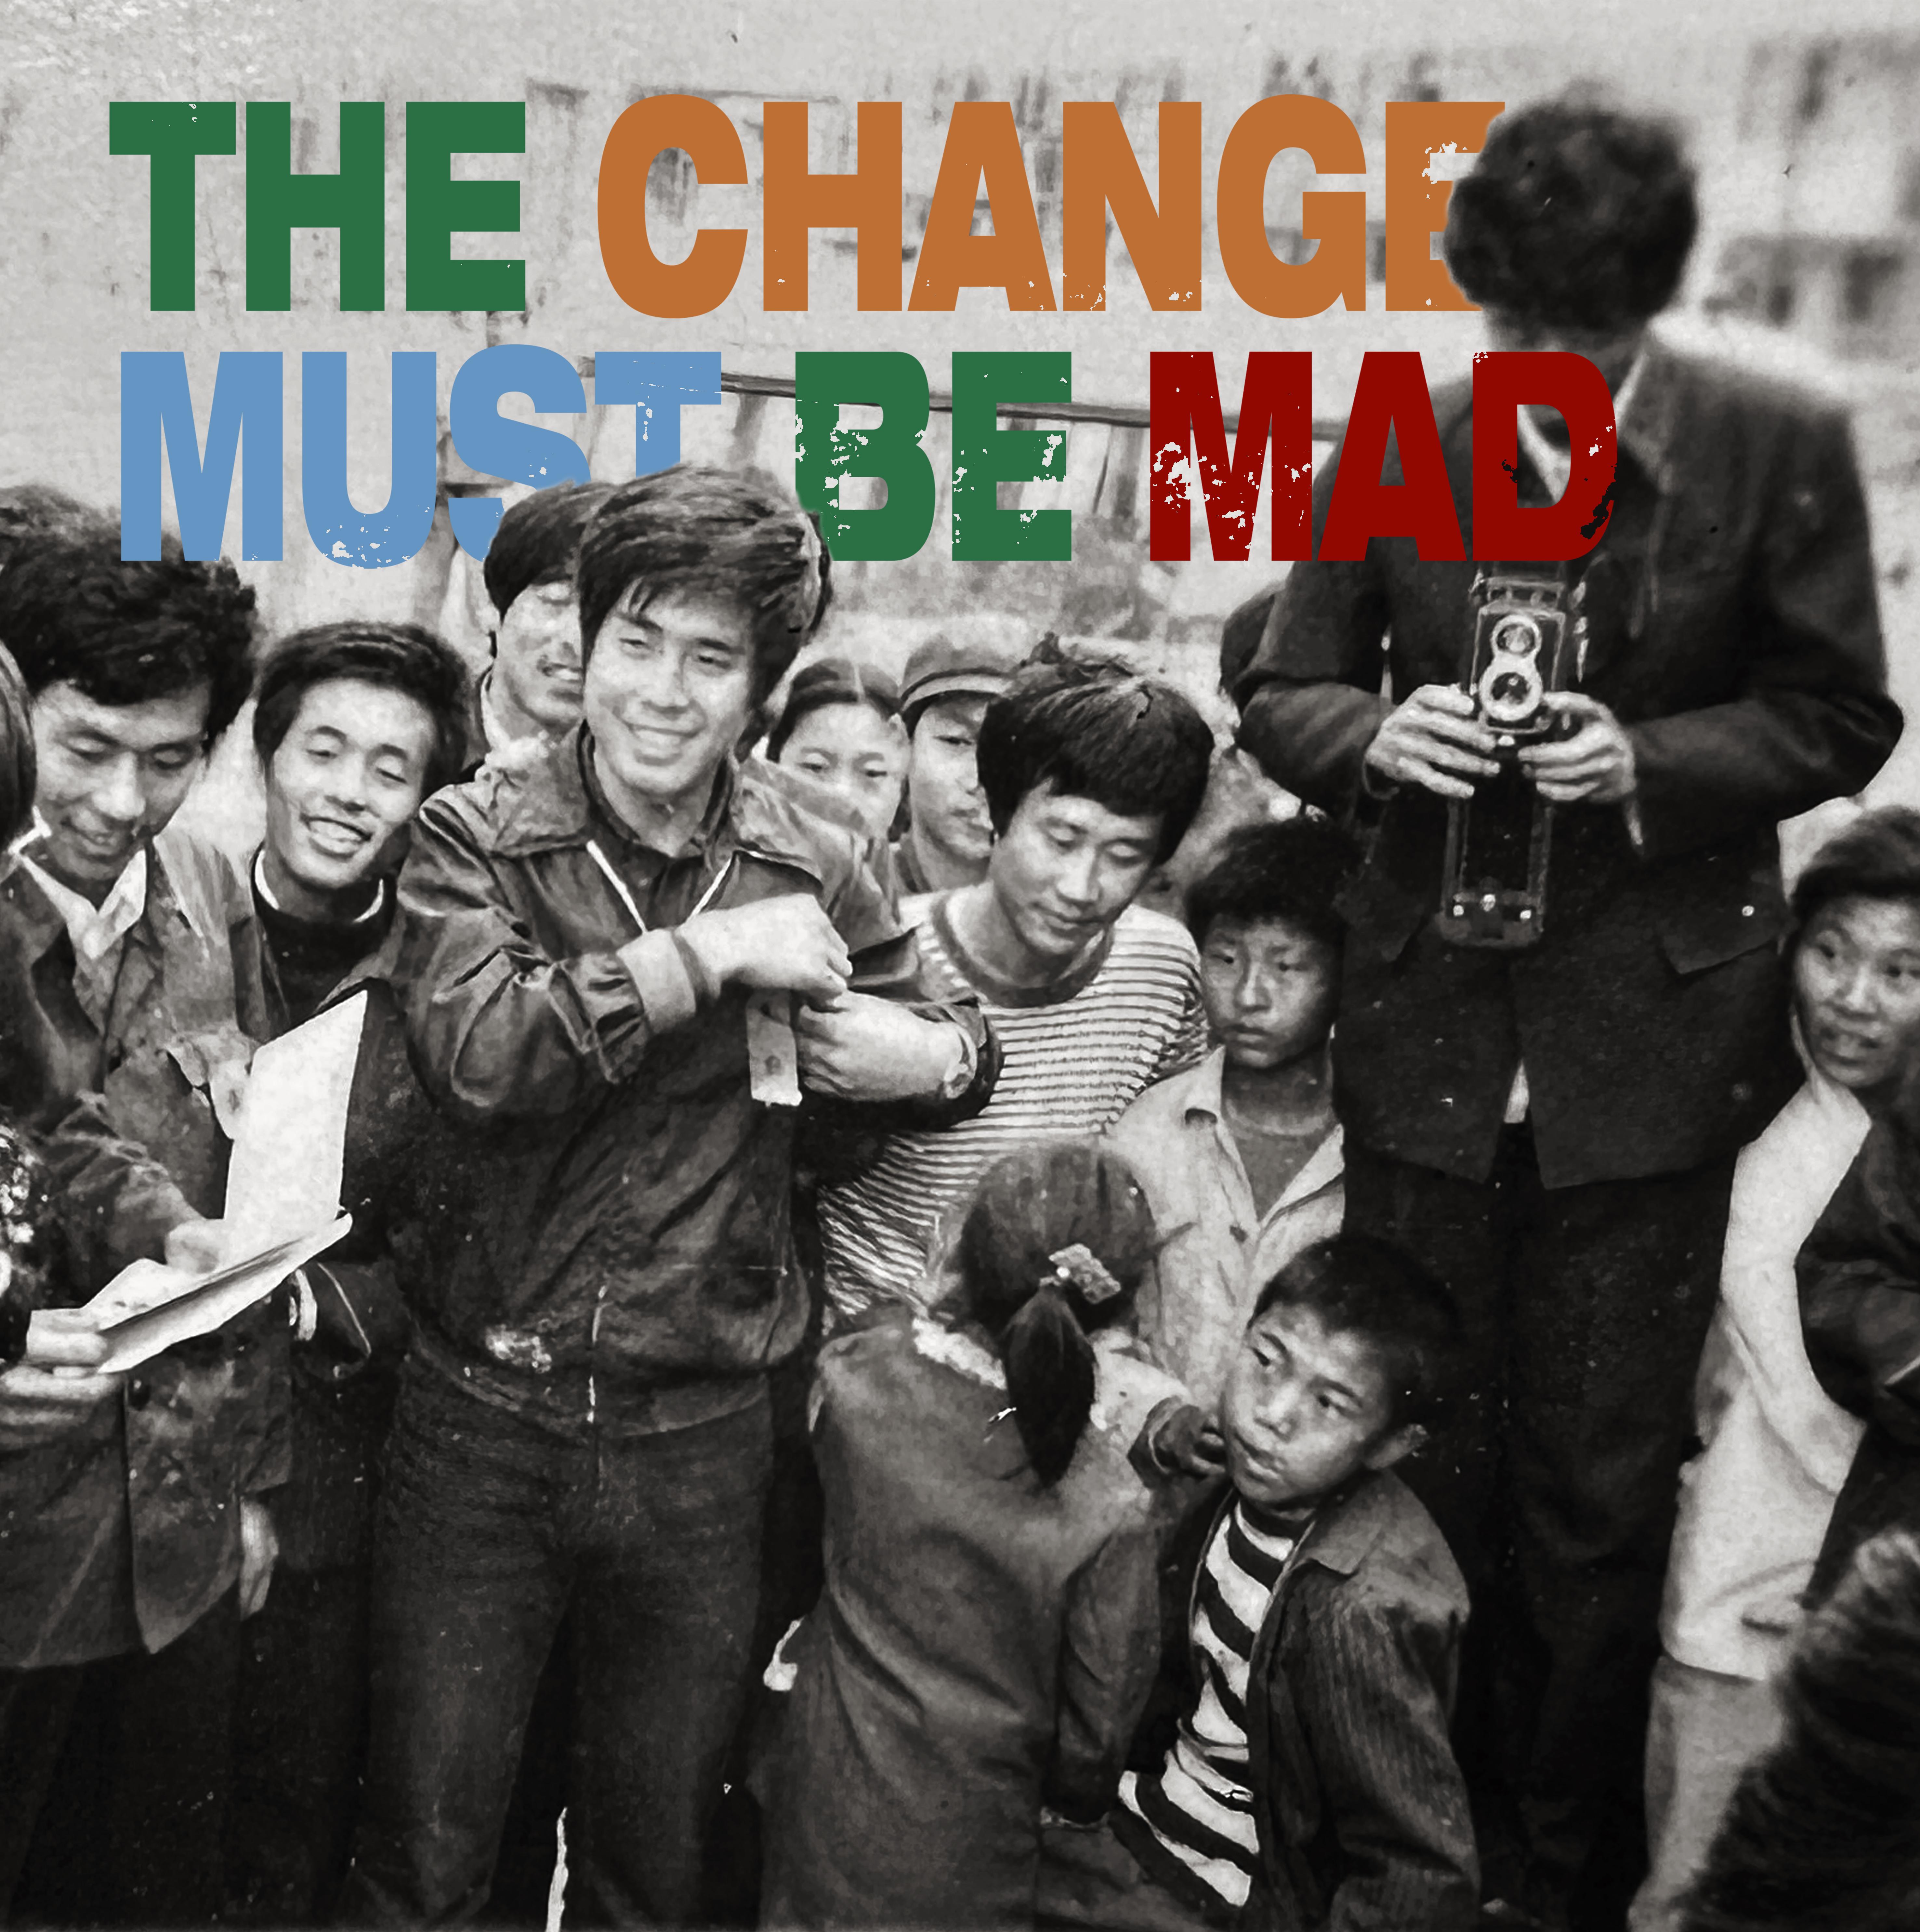 The Change Must Mad专辑